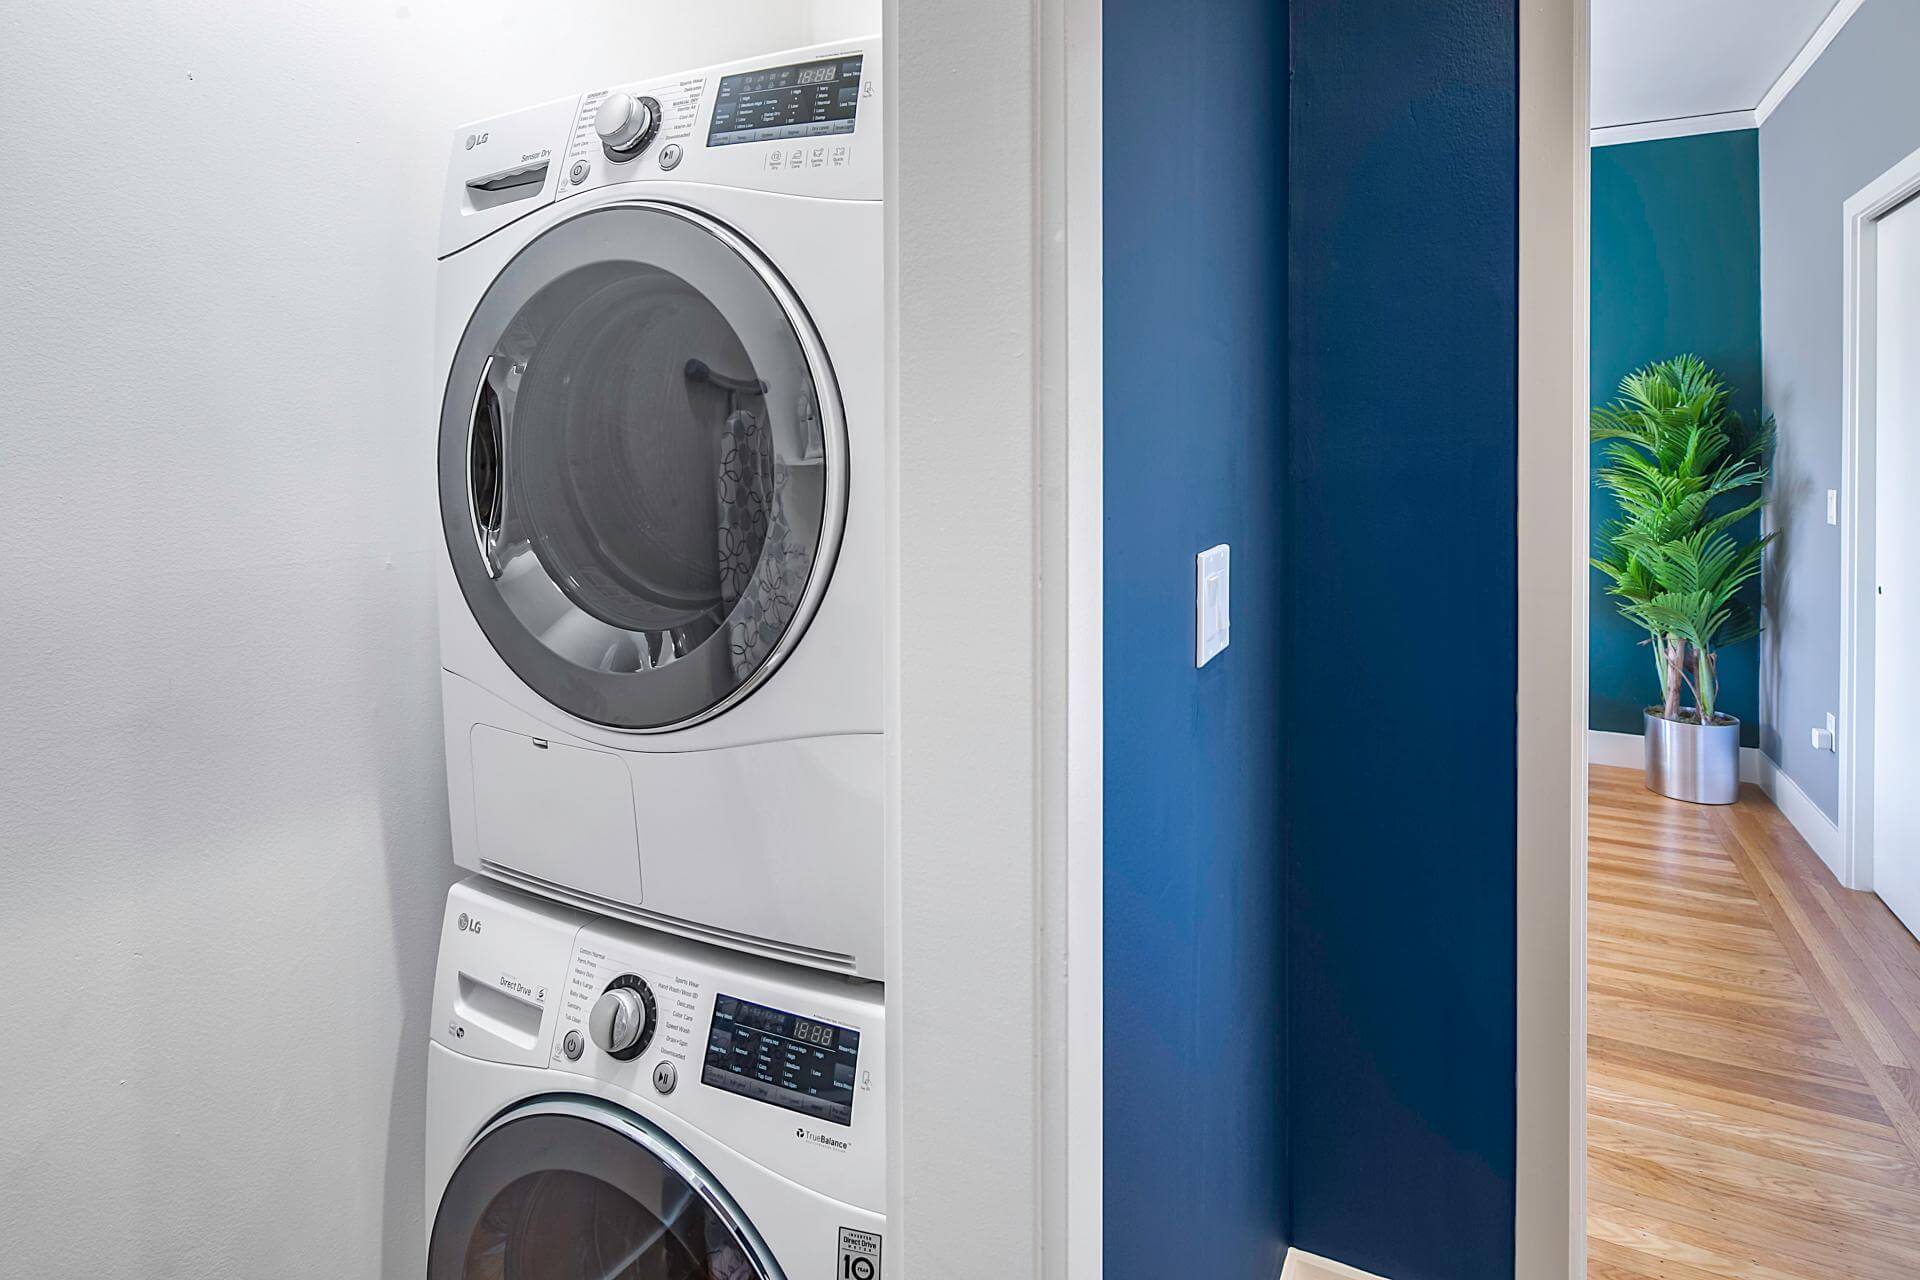 Washer and dryer unit in a Blueground apartment